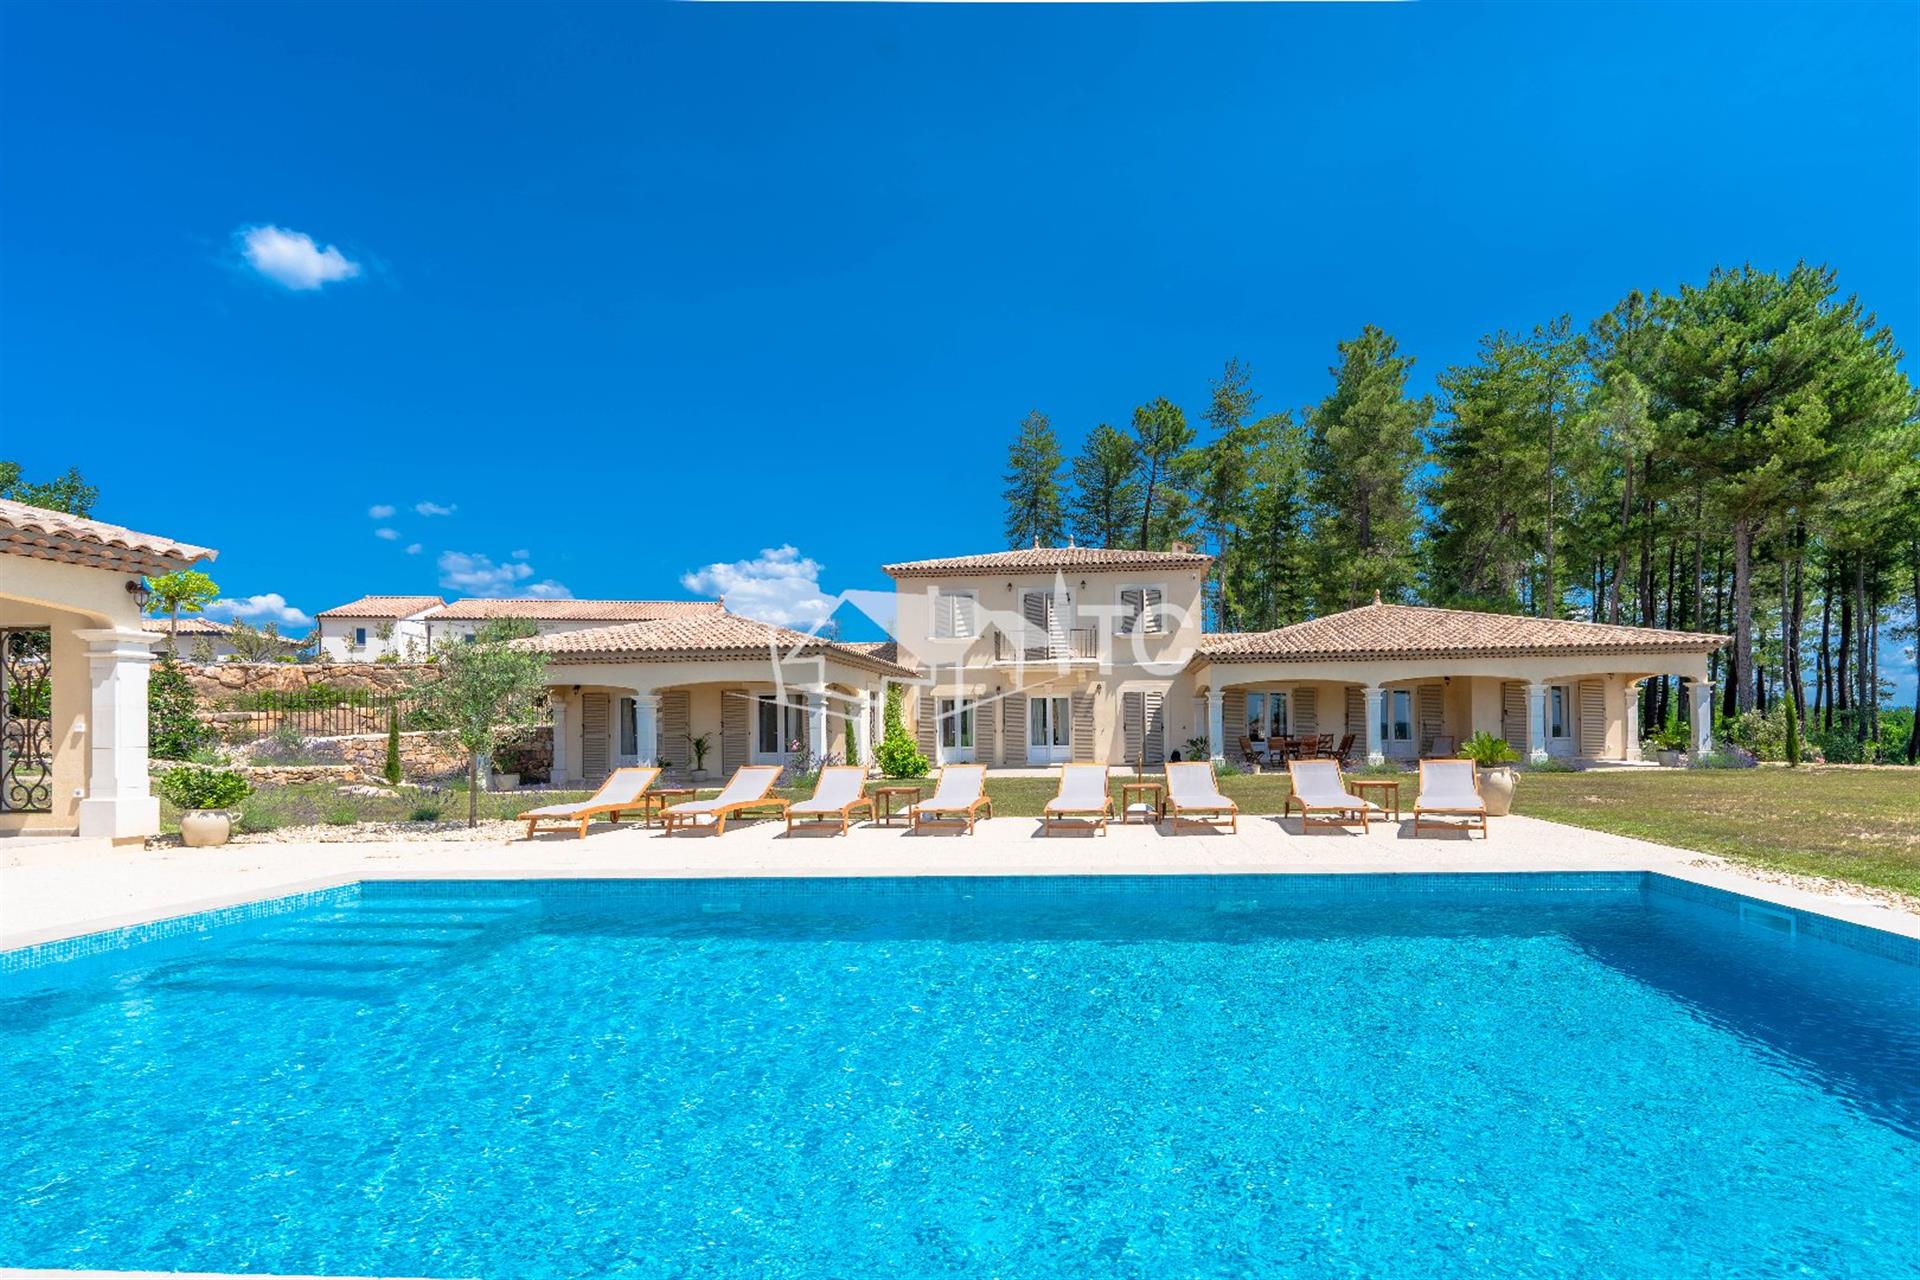 Superb Property 7 Bedrooms 6 Bathrooms Swimming Pool Dominant View 3000M² Of Land.